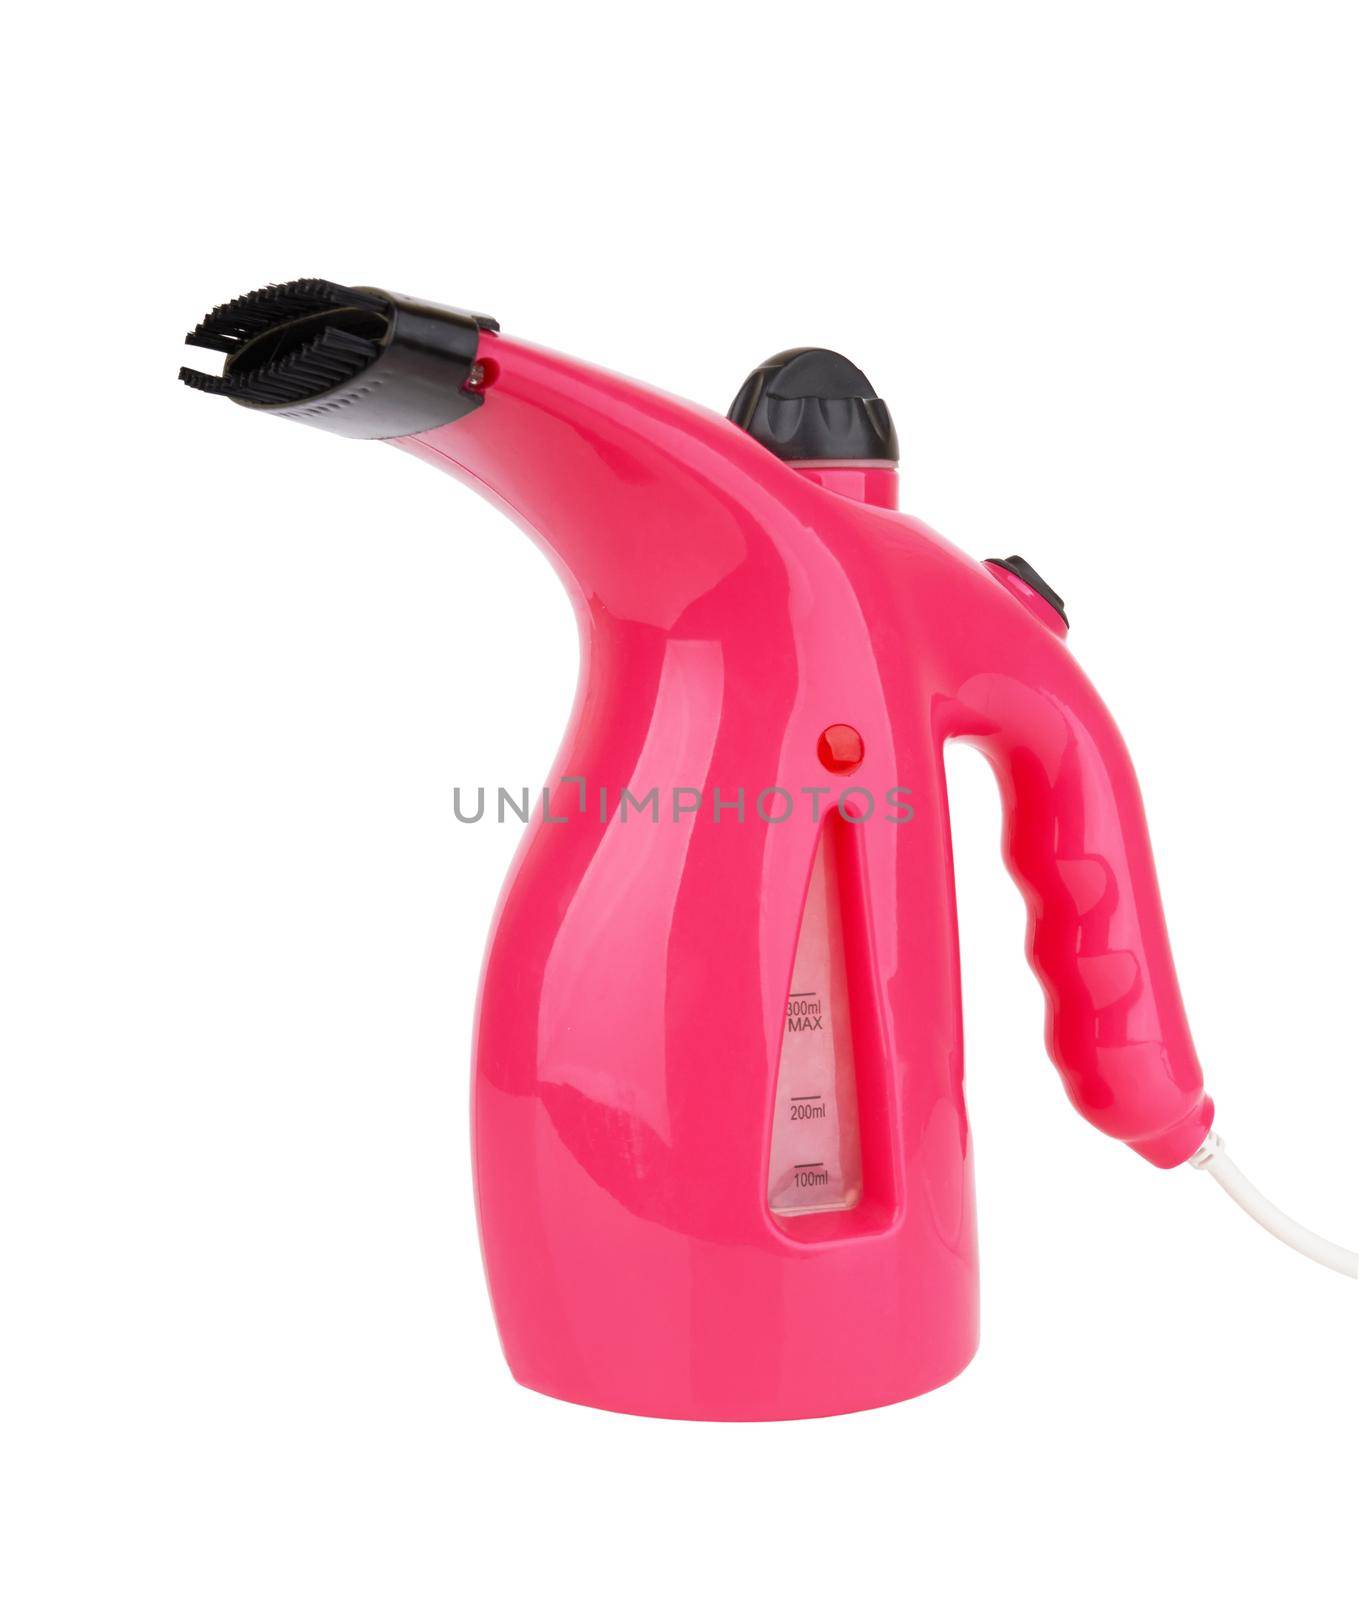 Hand steamer for clothes  by pioneer111